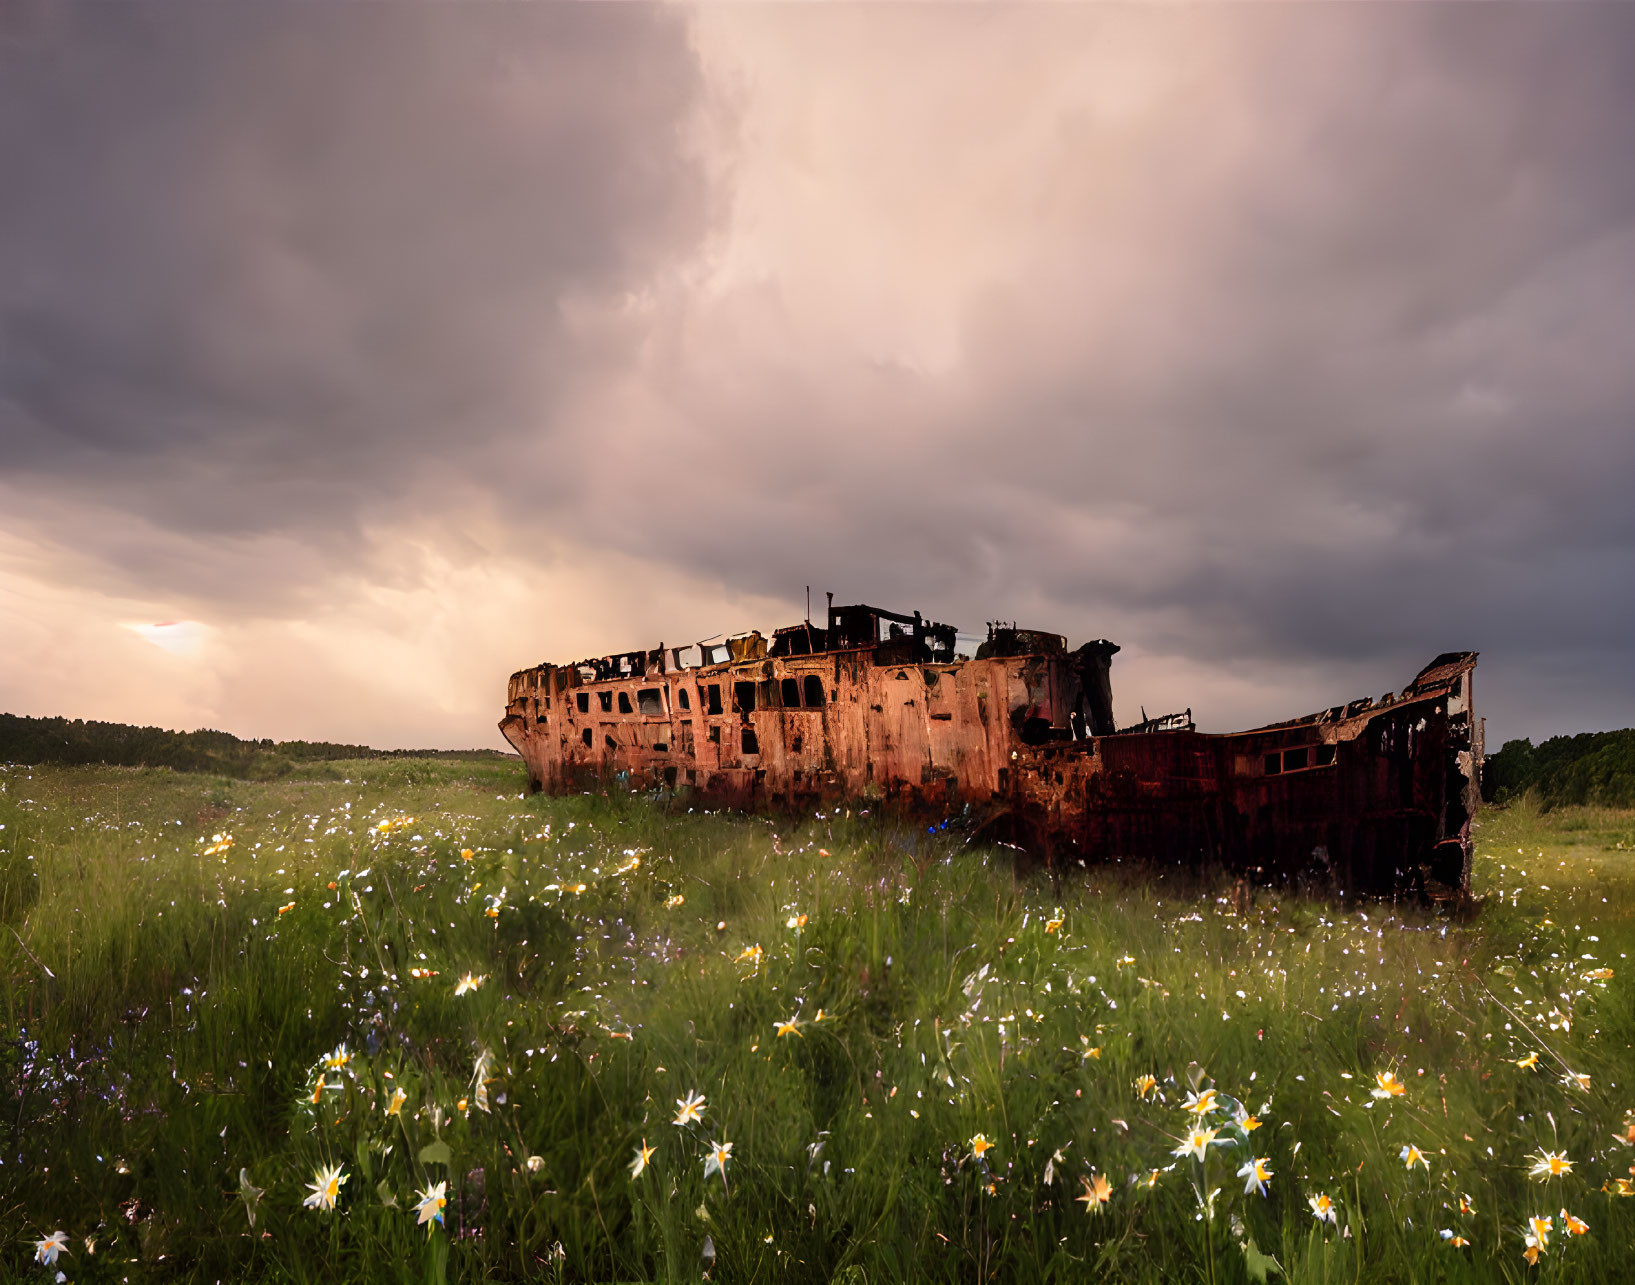 Rusted shipwreck in blooming field under dramatic sky